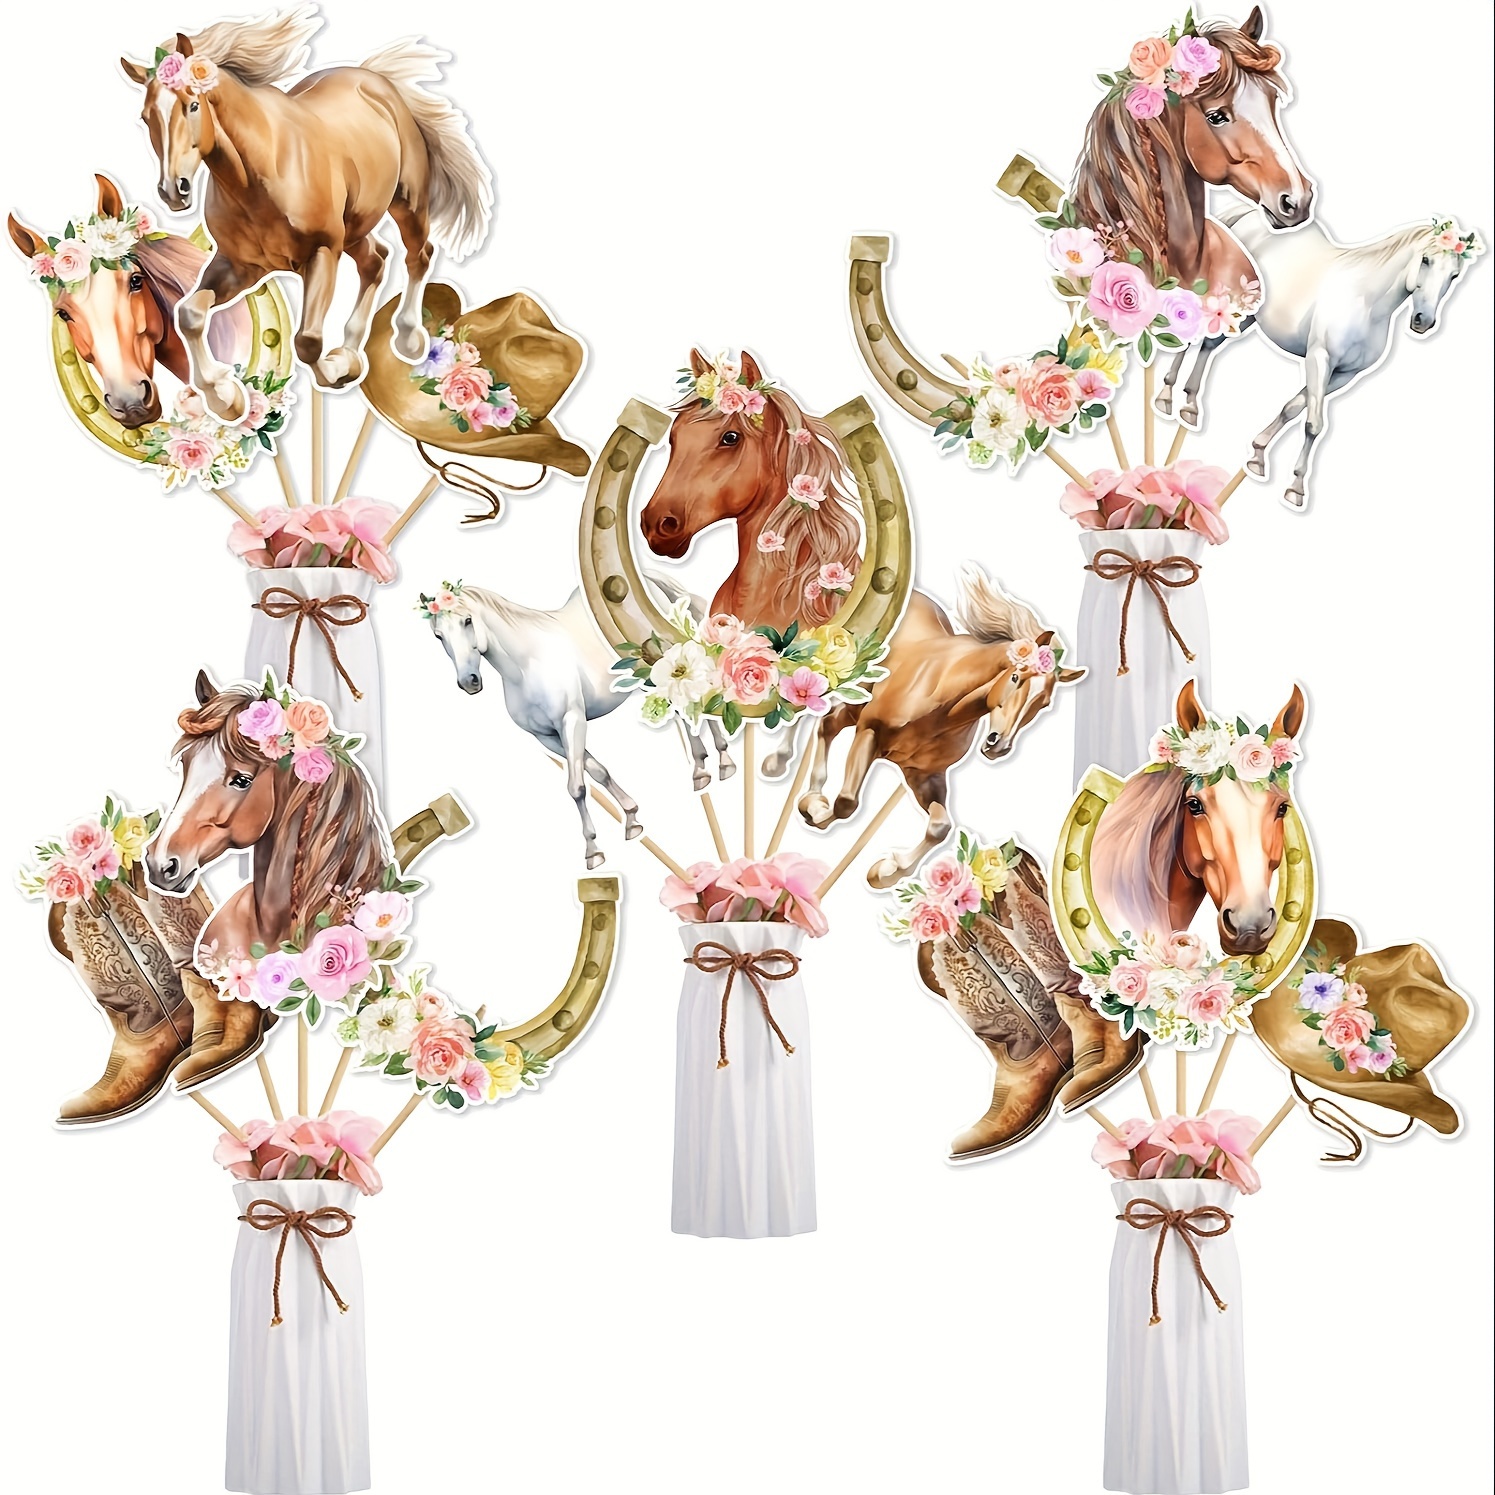 

24pcs Horse Centerpiece Sticky Table Decor, Horse Themed Birthday Party Supplies, Horse Racing Western Cowboy Pink Floral Centerpiece Table Top Home Decor